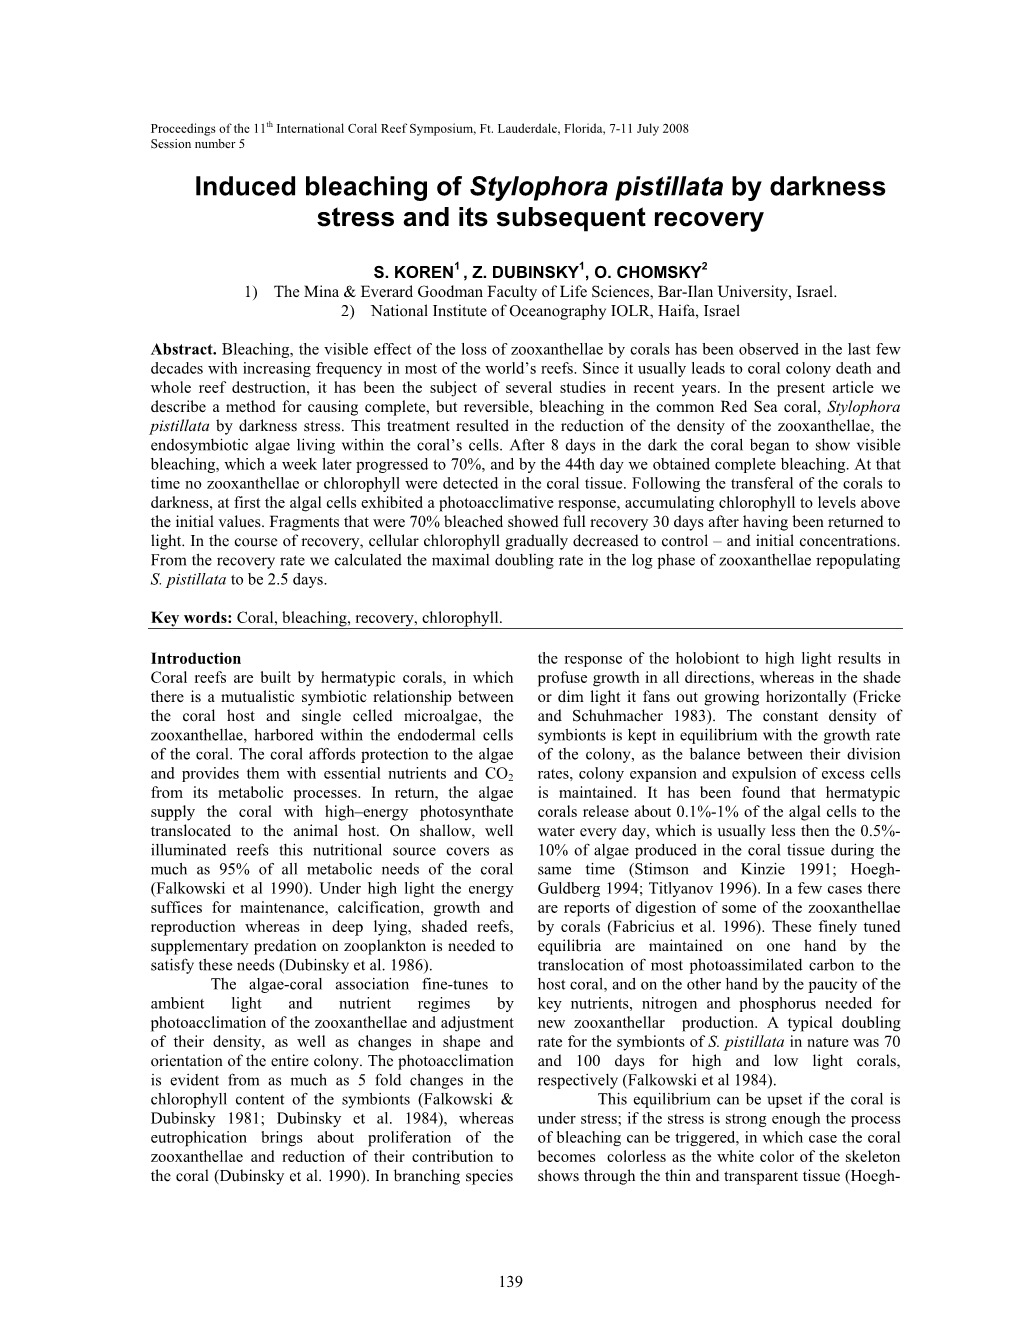 Induced Bleaching of Stylophora Pistillata by Darkness Stress and Its Subsequent Recovery